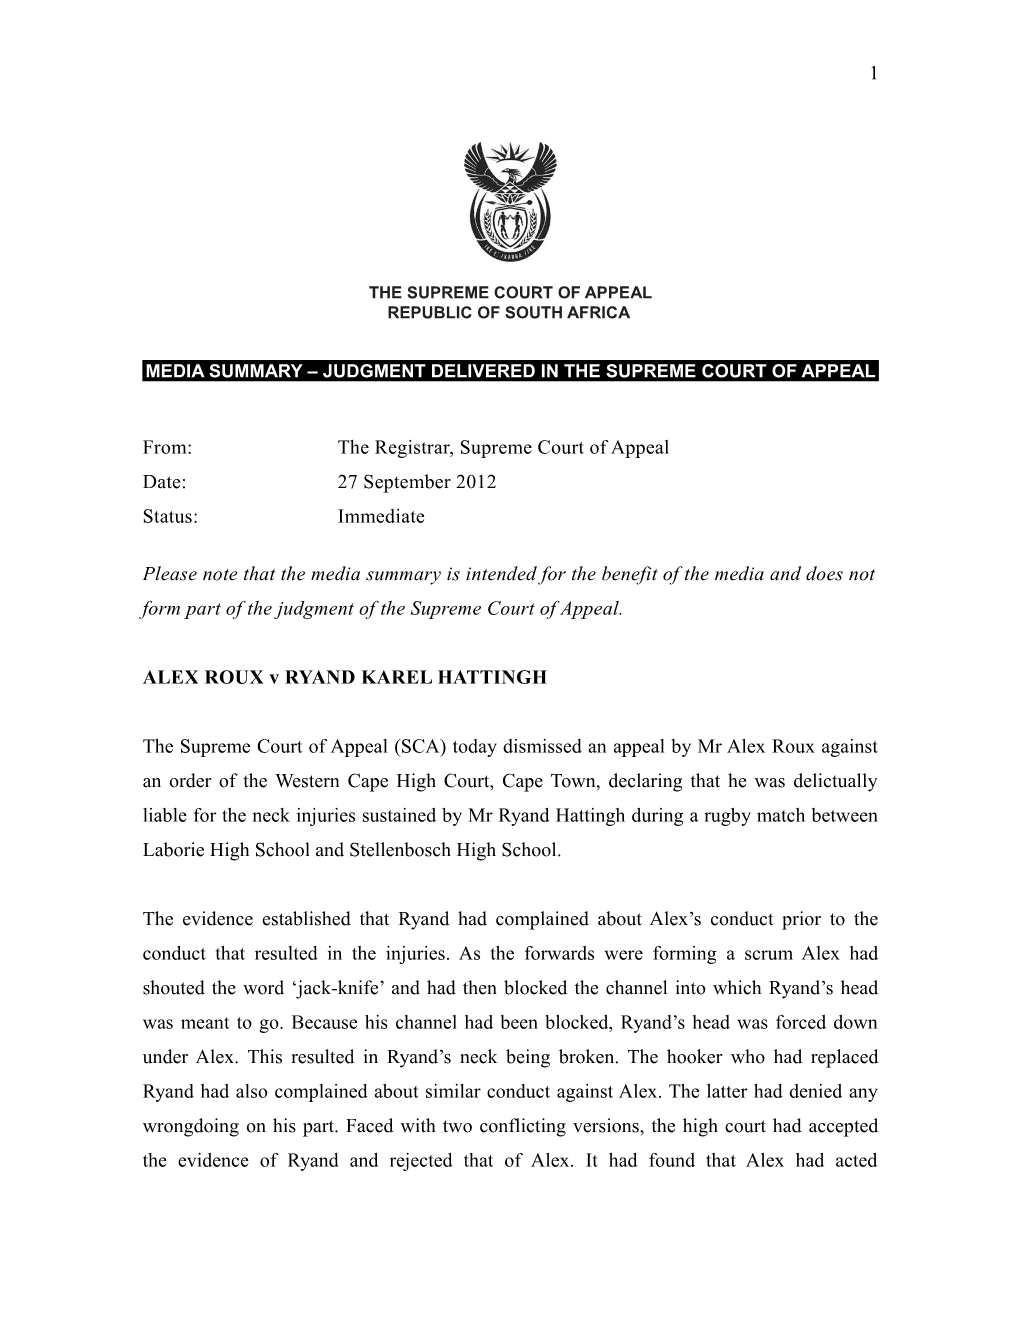 The Appellants Appealed Against an Order Made in the High Court, Pretoria in Terms of Which s3